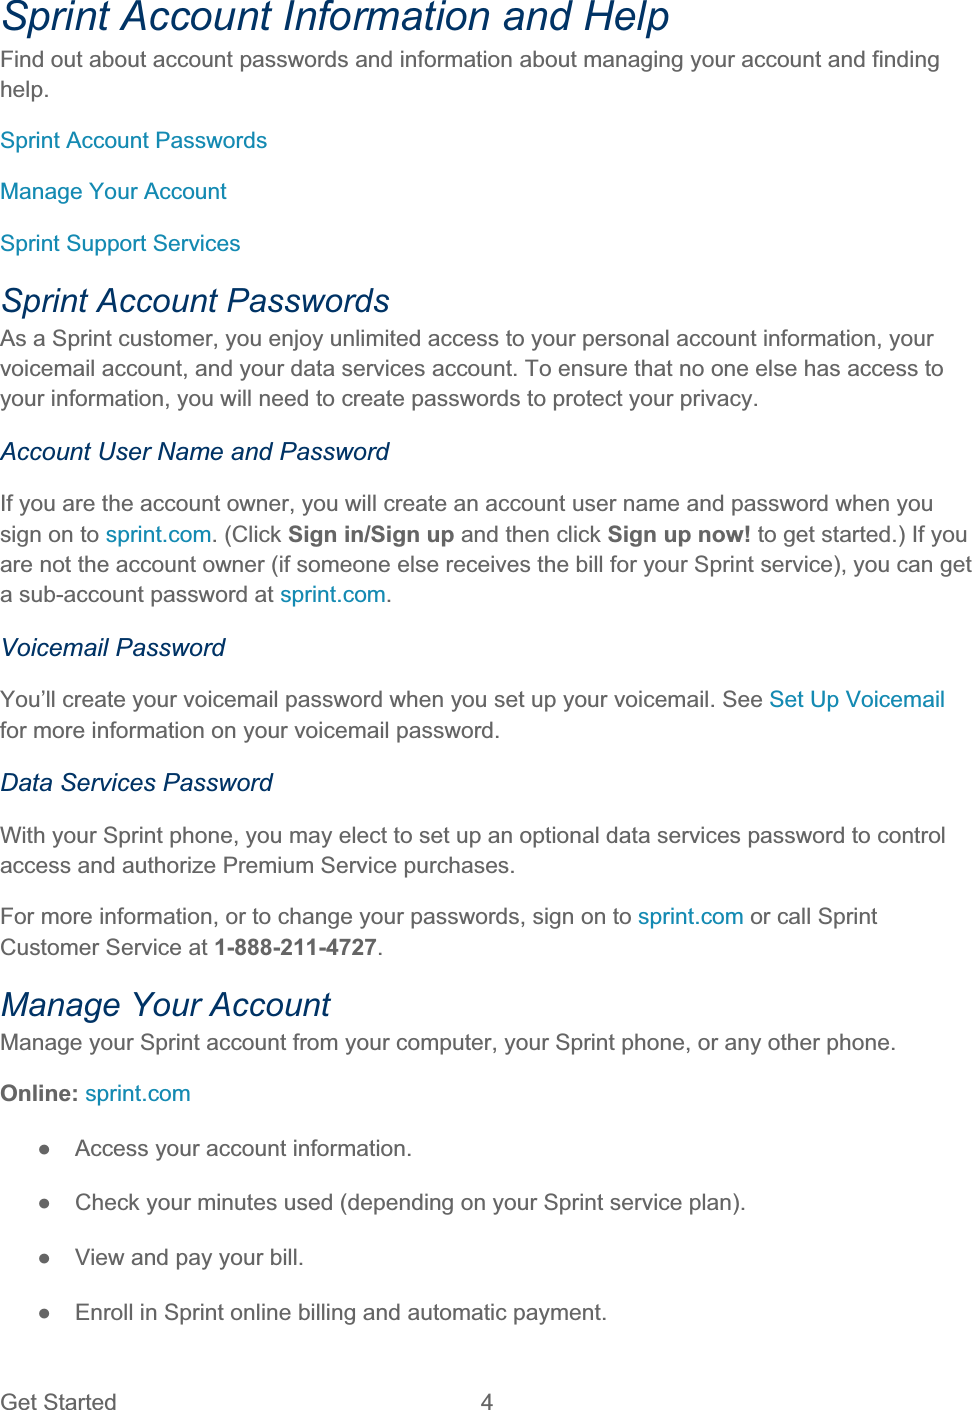 Get Started  4 Sprint Account Information and Help Find out about account passwords and information about managing your account and finding help.Sprint Account Passwords Manage Your Account Sprint Support Services Sprint Account Passwords As a Sprint customer, you enjoy unlimited access to your personal account information, your voicemail account, and your data services account. To ensure that no one else has access to your information, you will need to create passwords to protect your privacy. Account User Name and Password If you are the account owner, you will create an account user name and password when you sign on to sprint.com. (Click Sign in/Sign up and then click Sign up now! to get started.) If you are not the account owner (if someone else receives the bill for your Sprint service), you can get a sub-account password at sprint.com.Voicemail Password You’ll create your voicemail password when you set up your voicemail. See Set Up Voicemail for more information on your voicemail password. Data Services Password With your Sprint phone, you may elect to set up an optional data services password to control access and authorize Premium Service purchases. For more information, or to change your passwords, sign on to sprint.com or call Sprint Customer Service at 1-888-211-4727.Manage Your Account Manage your Sprint account from your computer, your Sprint phone, or any other phone. Online: sprint.comŏ  Access your account information. ŏ  Check your minutes used (depending on your Sprint service plan). ŏ  View and pay your bill. ŏ  Enroll in Sprint online billing and automatic payment. 